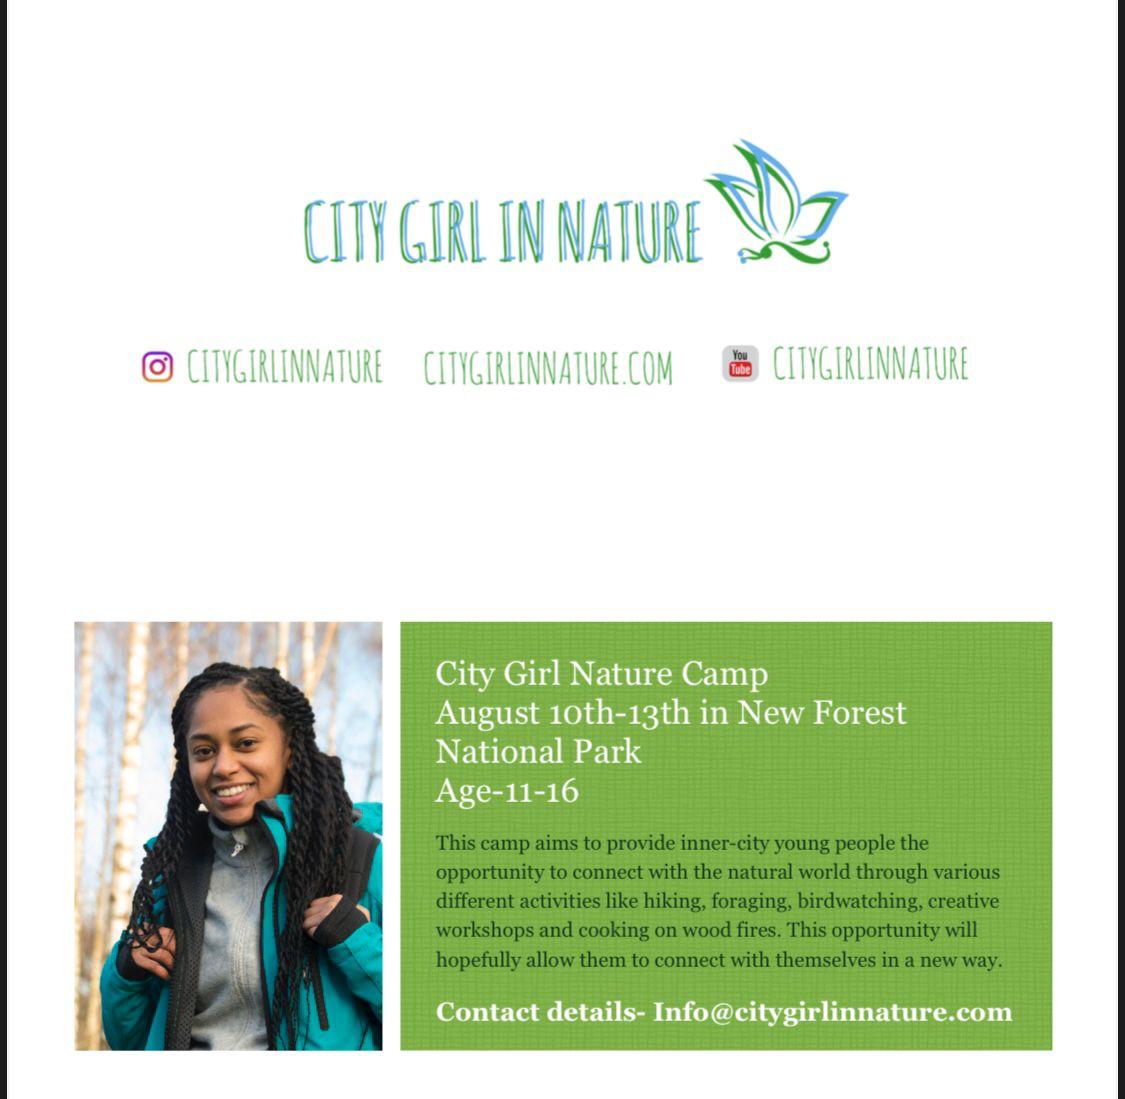 Love this!!! @citygirlnature 
August 10 to 13 in New Forest National Park 
11 - 16
Contact: info@citygirlinnature.com

Maybe one day we can do something for our #Siblings of #Autistic #SEND 

And autistic /SEND partipants that don't require 1:1 supervision.

#Nature https://t.co/t8PbNgoO6U